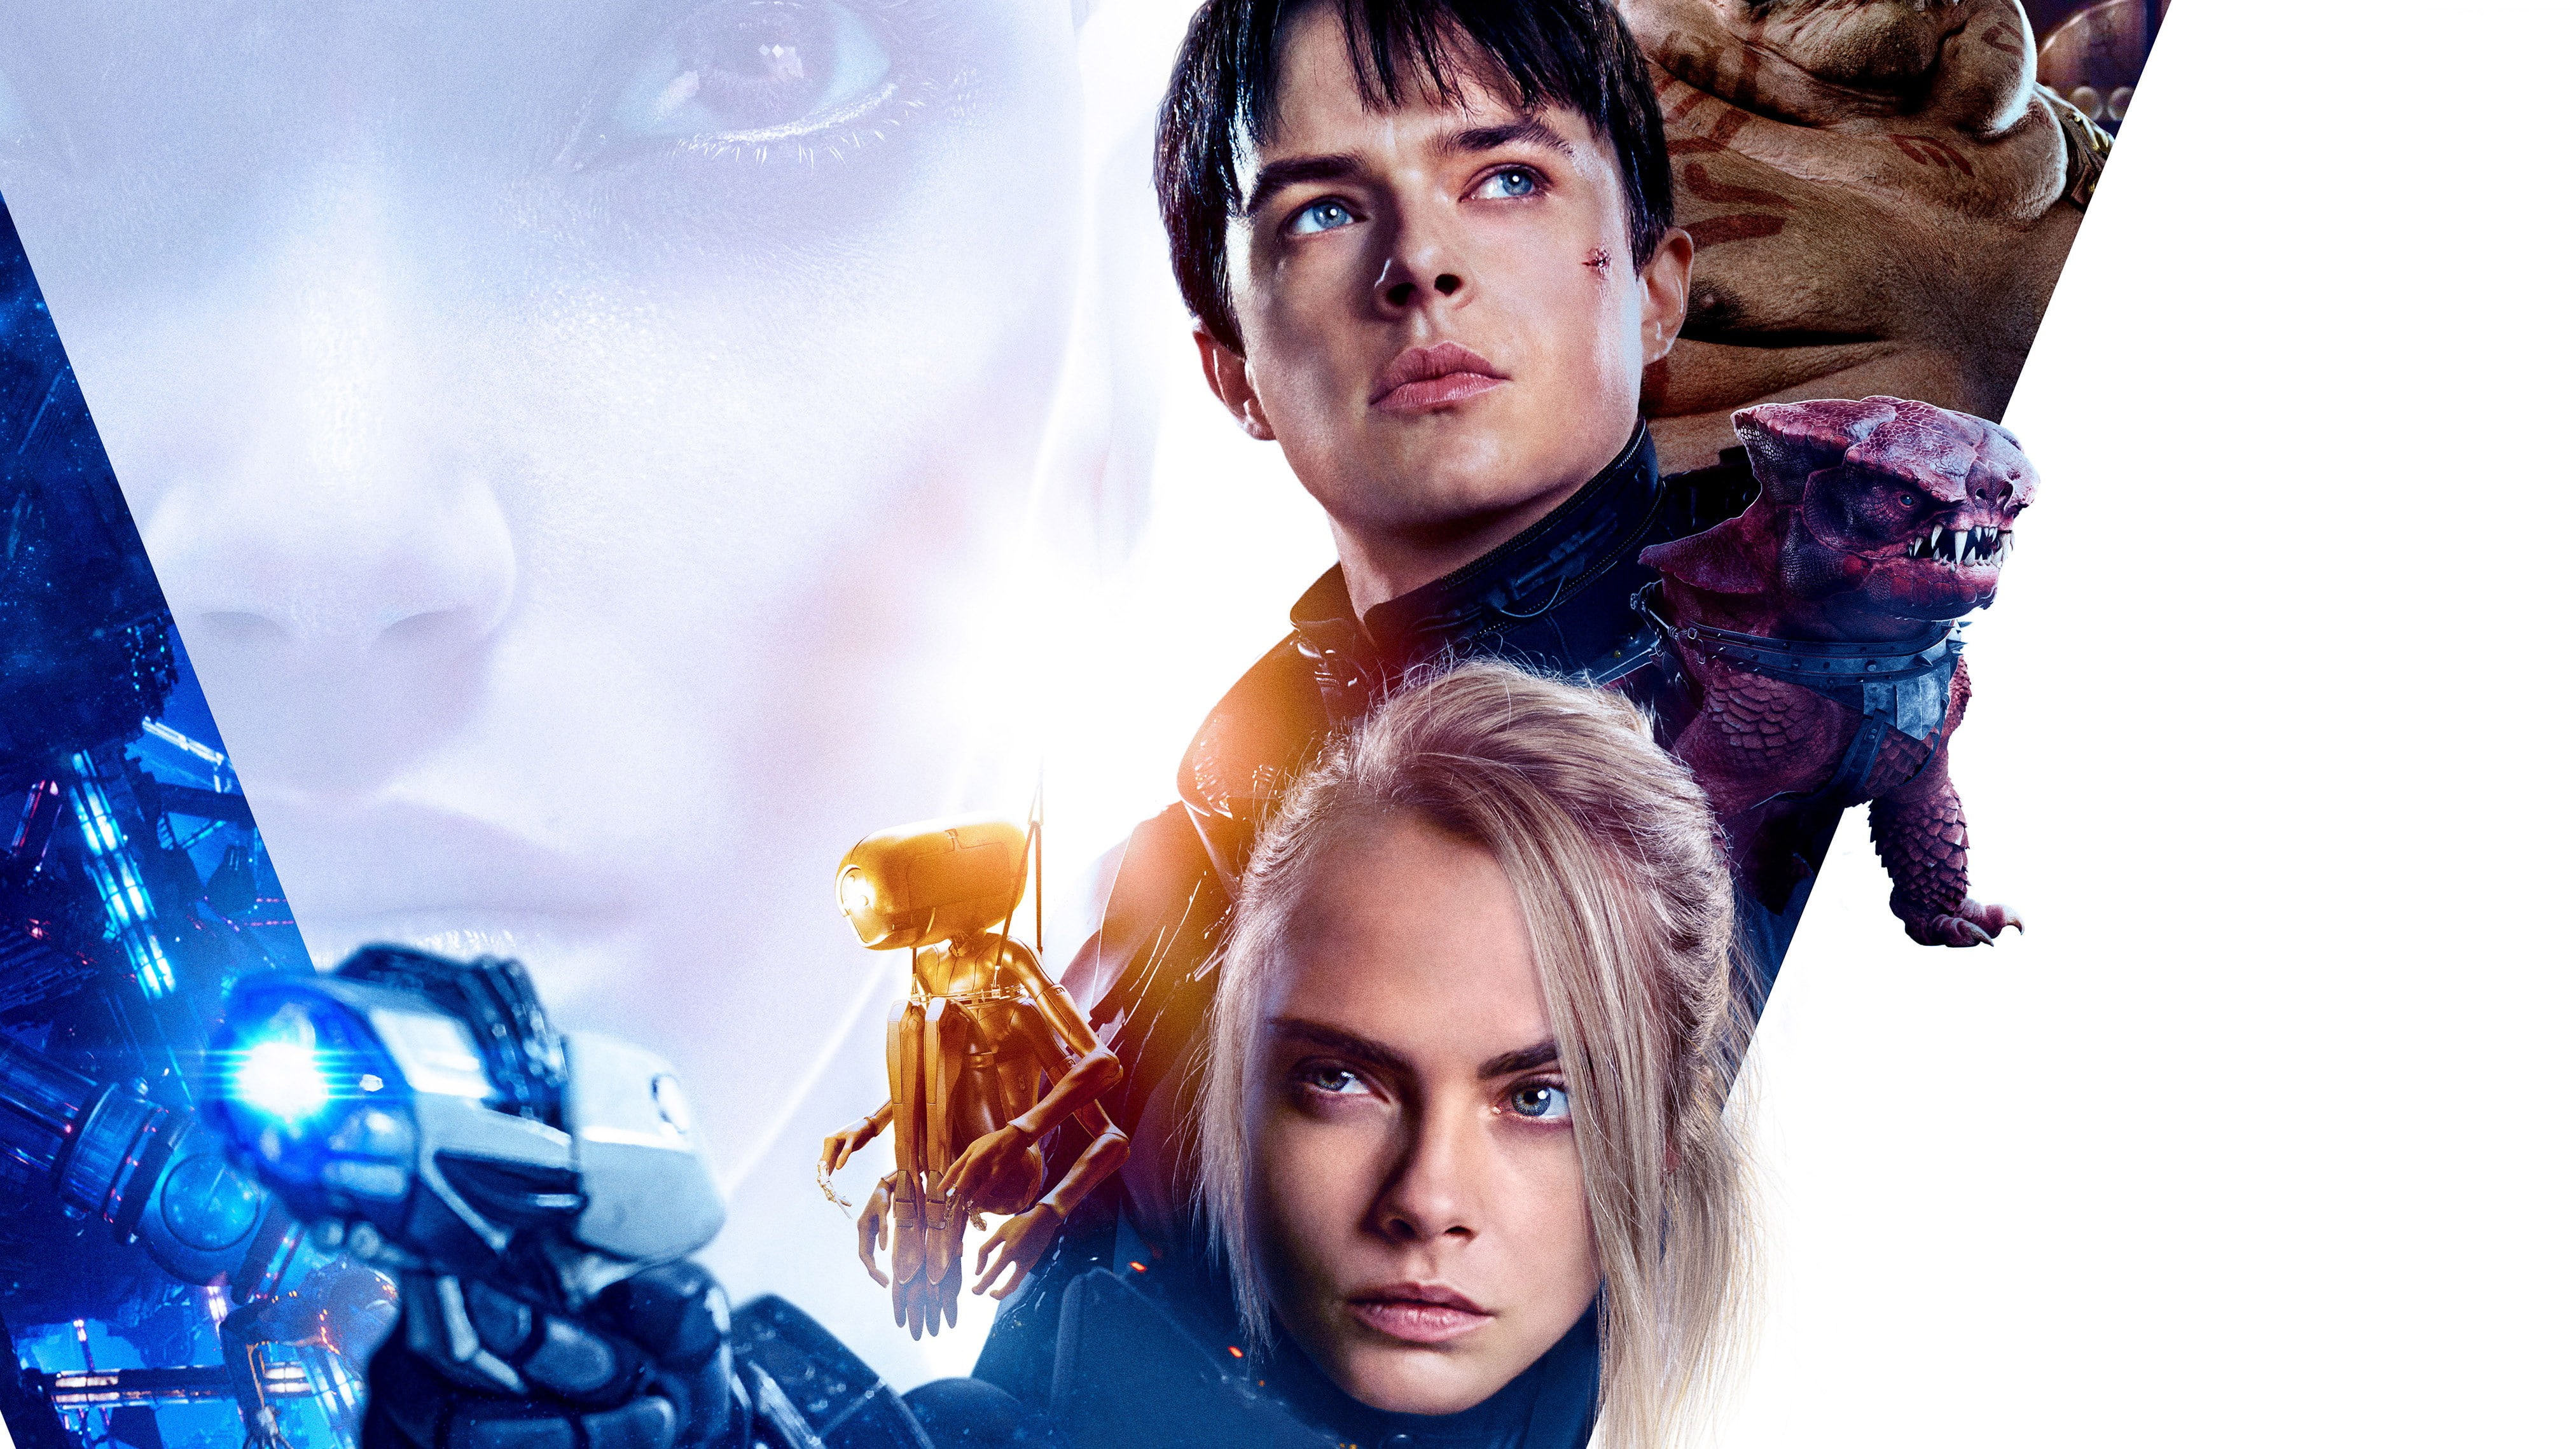 4k, Dane DeHaan, Cara Delevingne, Valerian and the City of a Thousand Planets